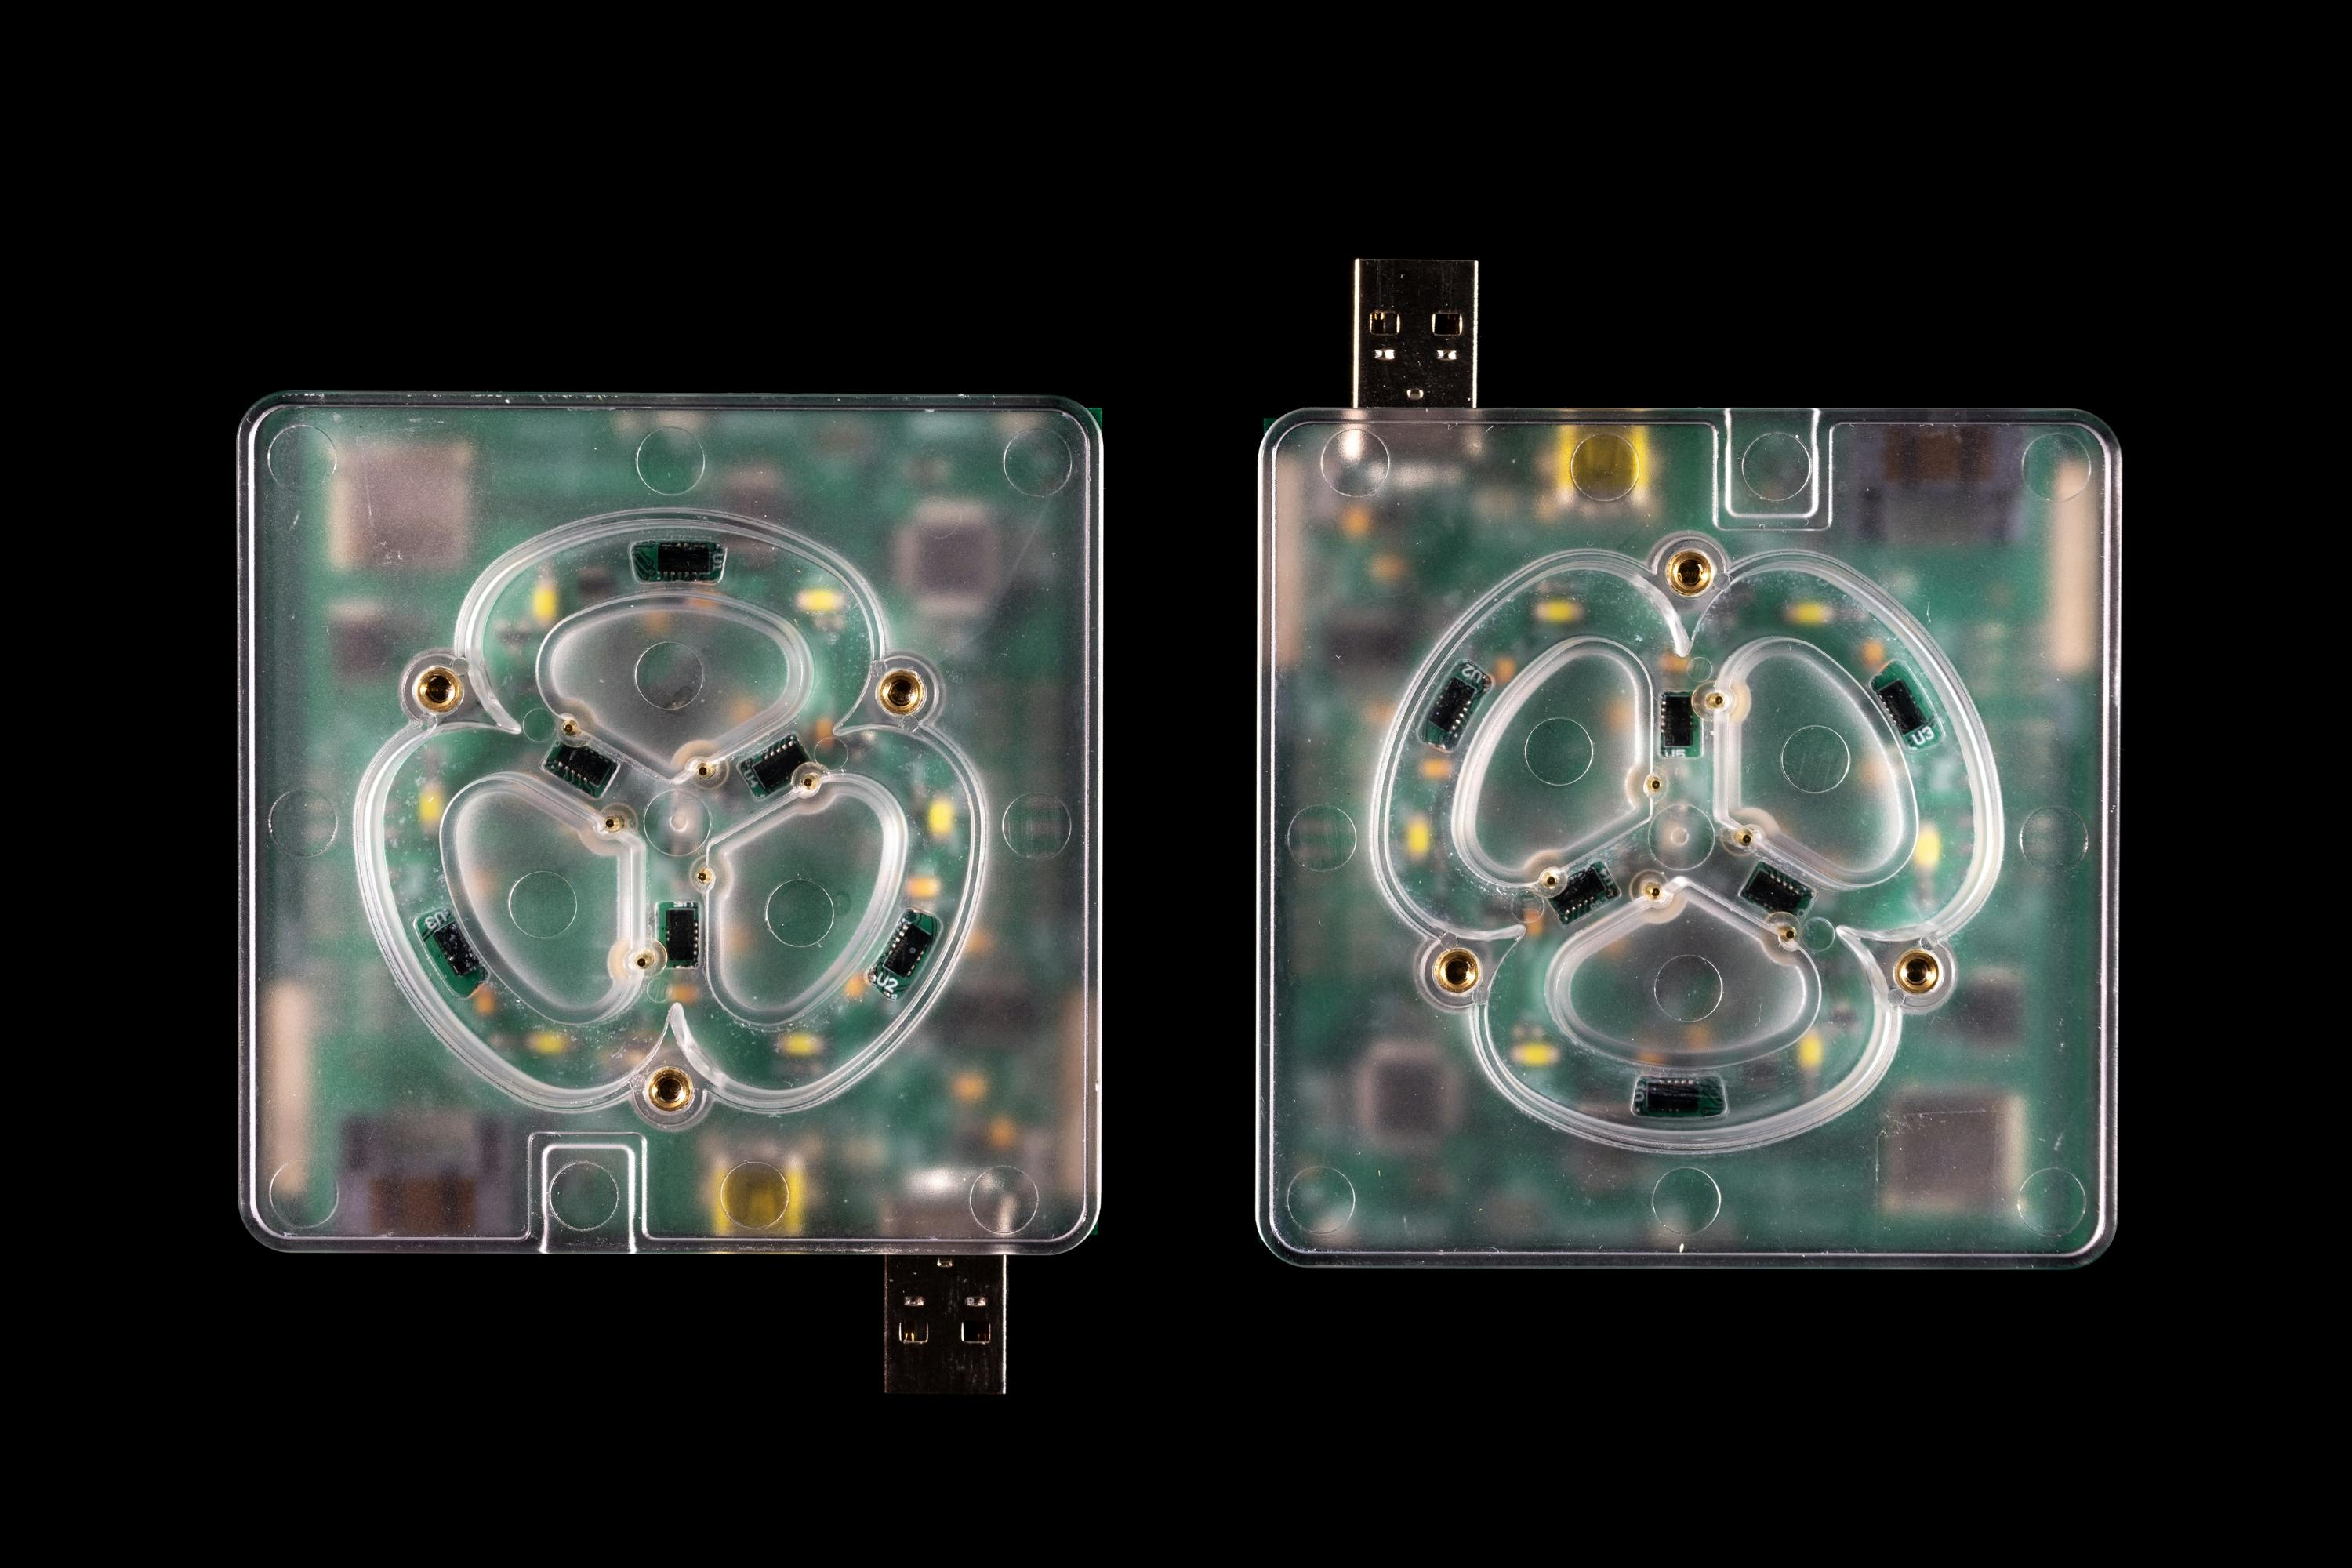 Two square tadpole mazes with see-through exterior showing circuit board.